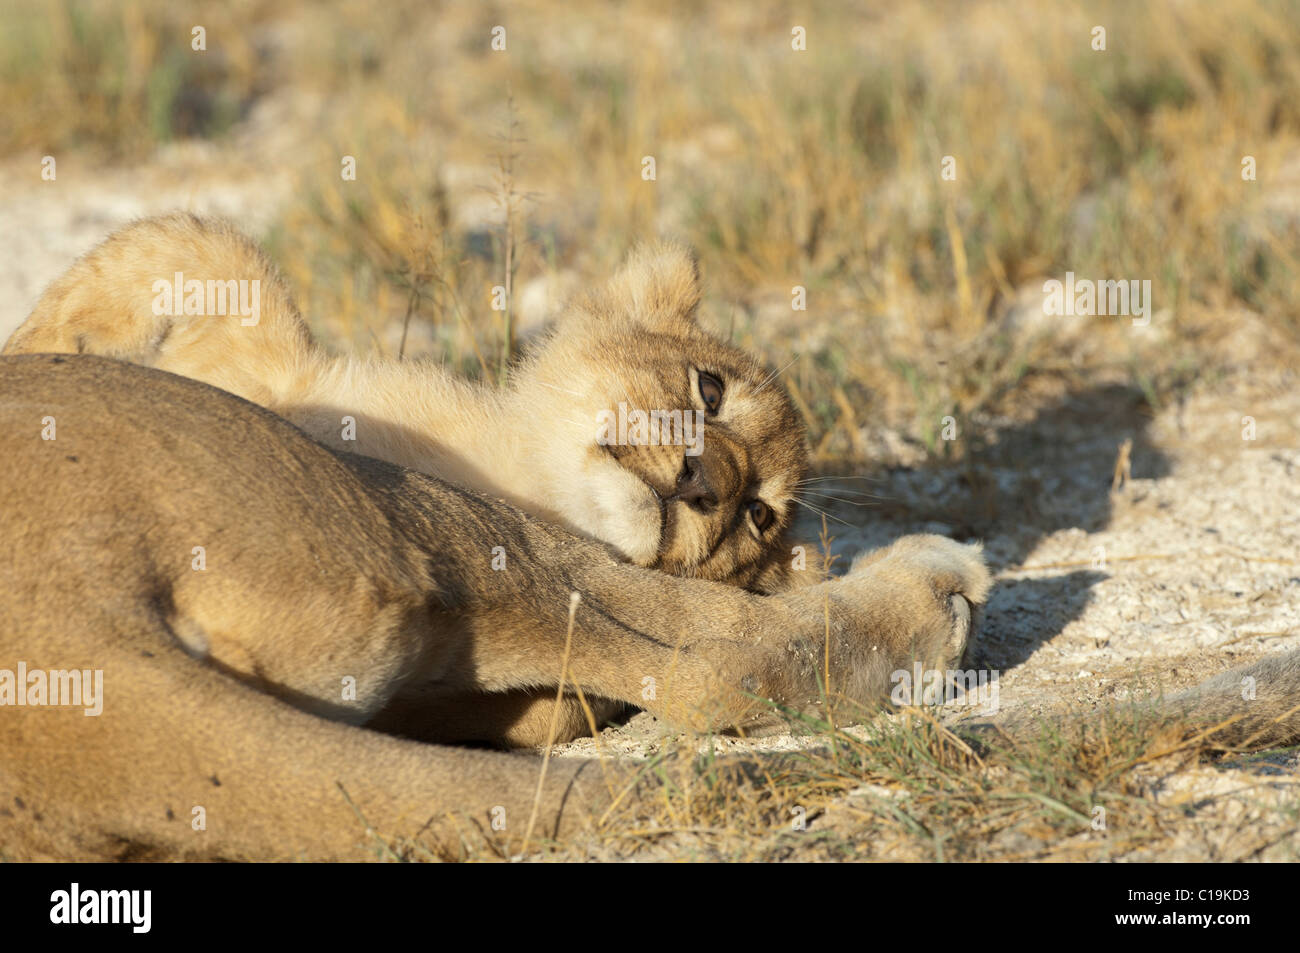 Stock photo of a lion cub laying by her mother's back foot. Stock Photo